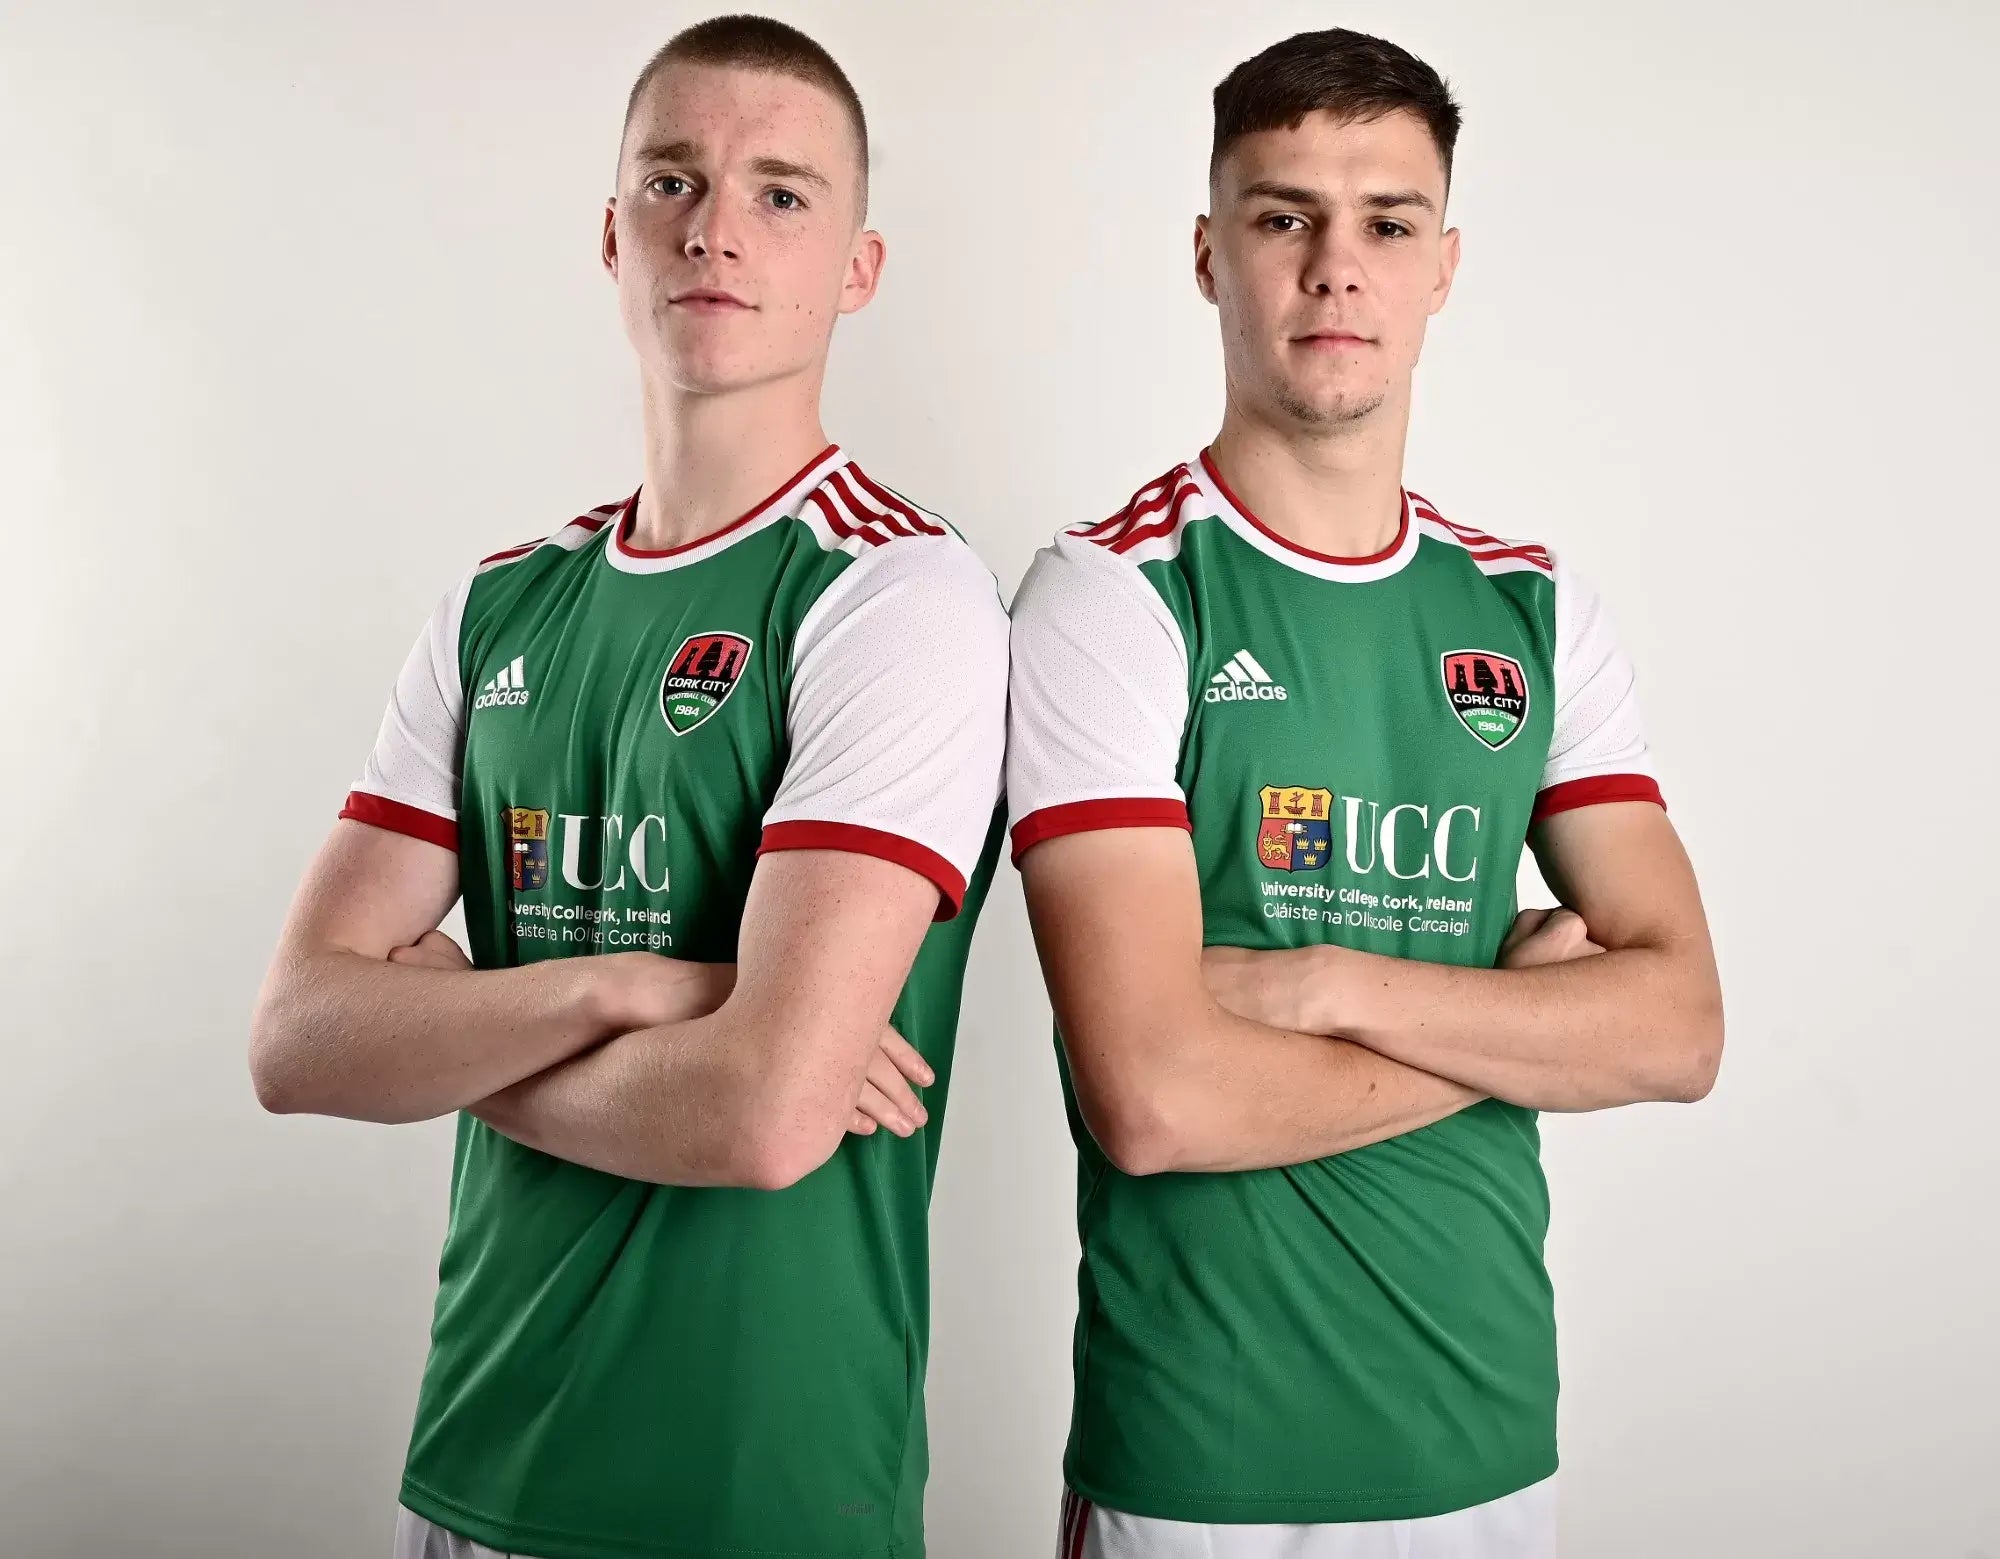 2022 Home Shirt Now Available!